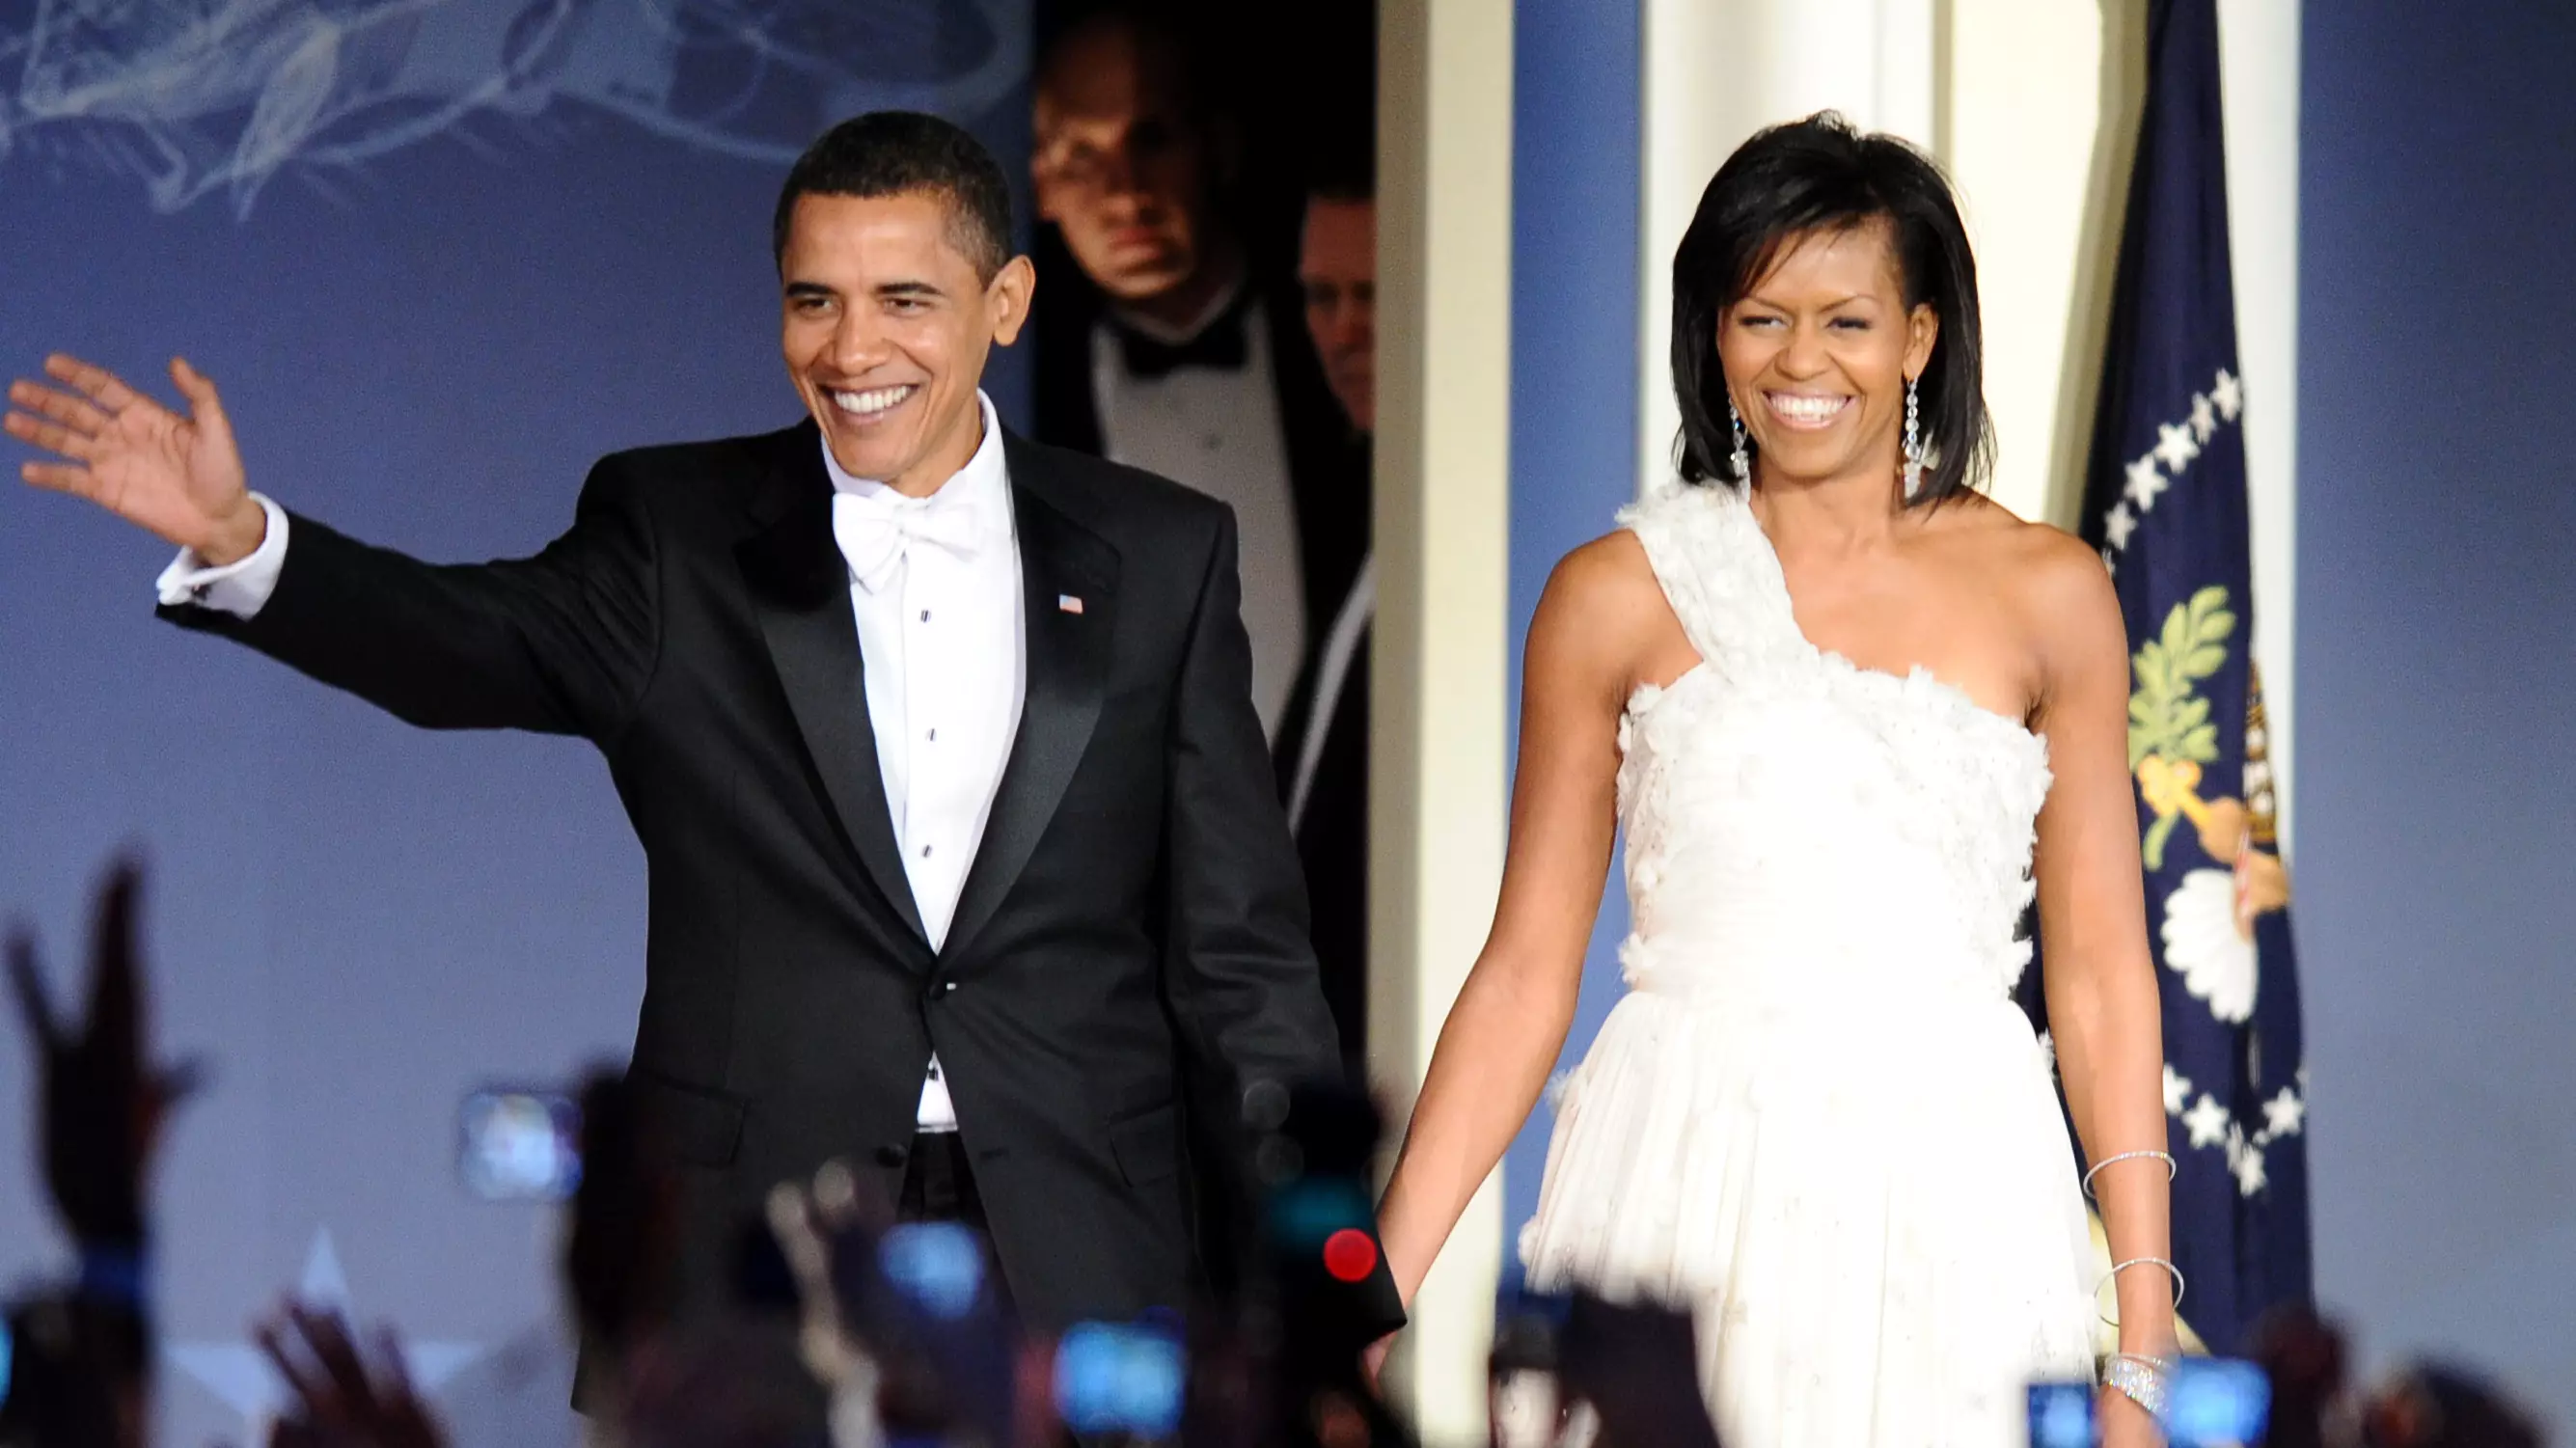 Barack And Michelle Obama Have Been Voted The Most Admired Man And Woman